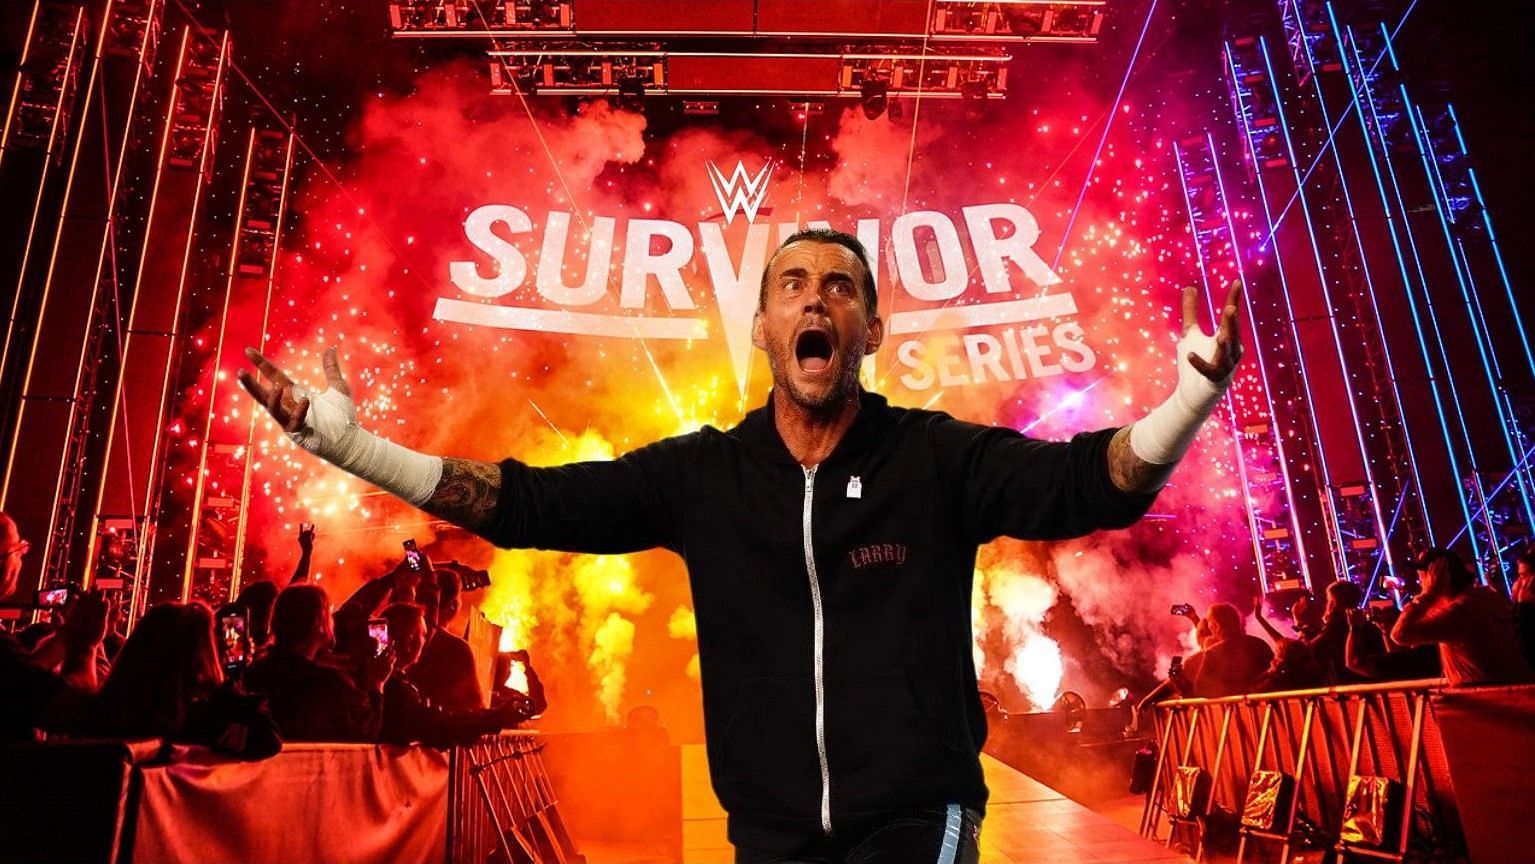 Will CM Punk show up at Survivor Series this year?